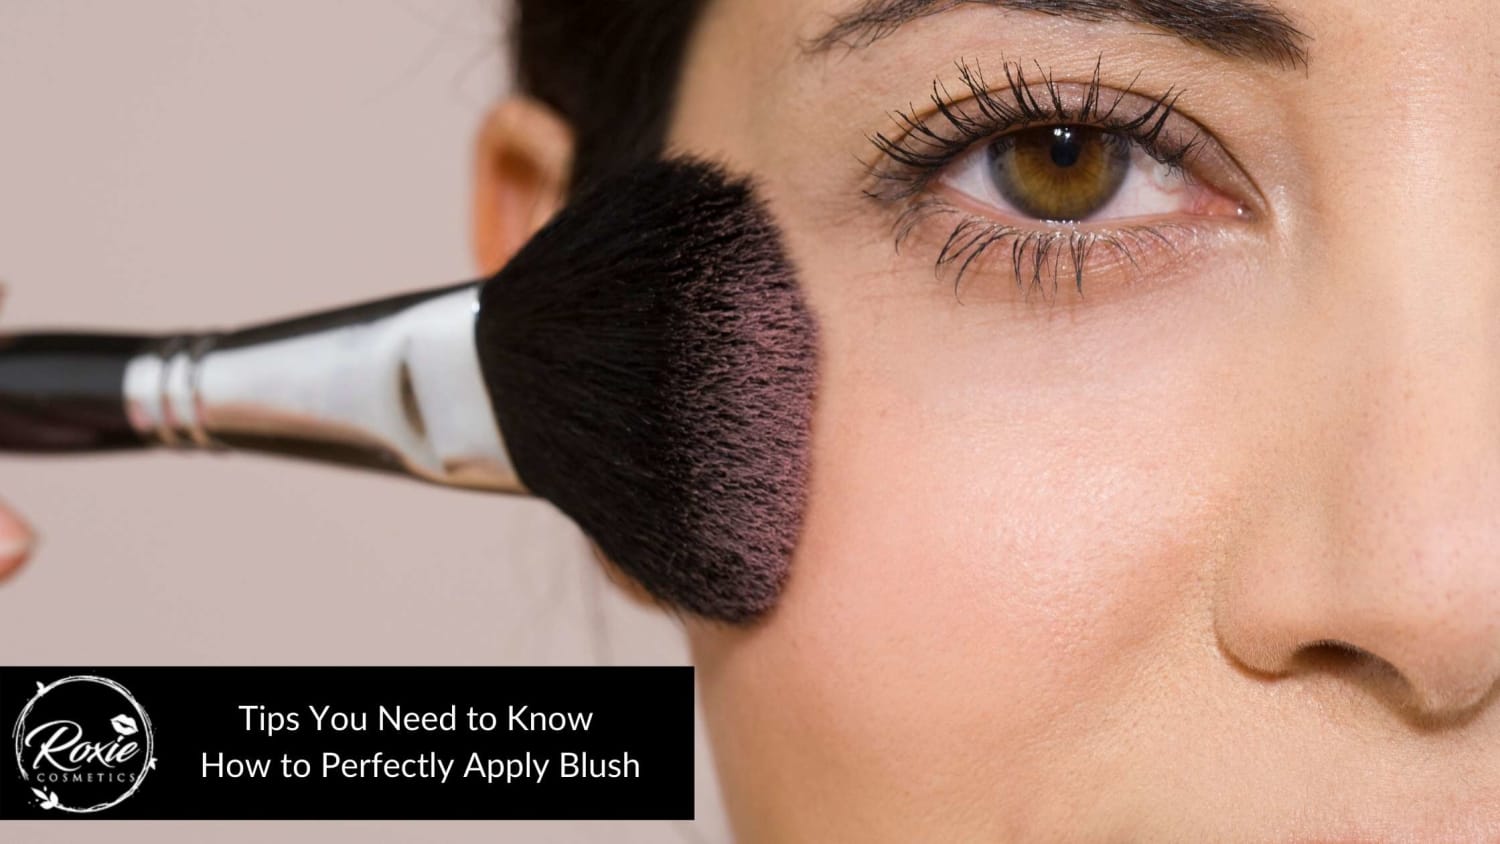 Tips You Need to Know How to Perfectly Apply Blush